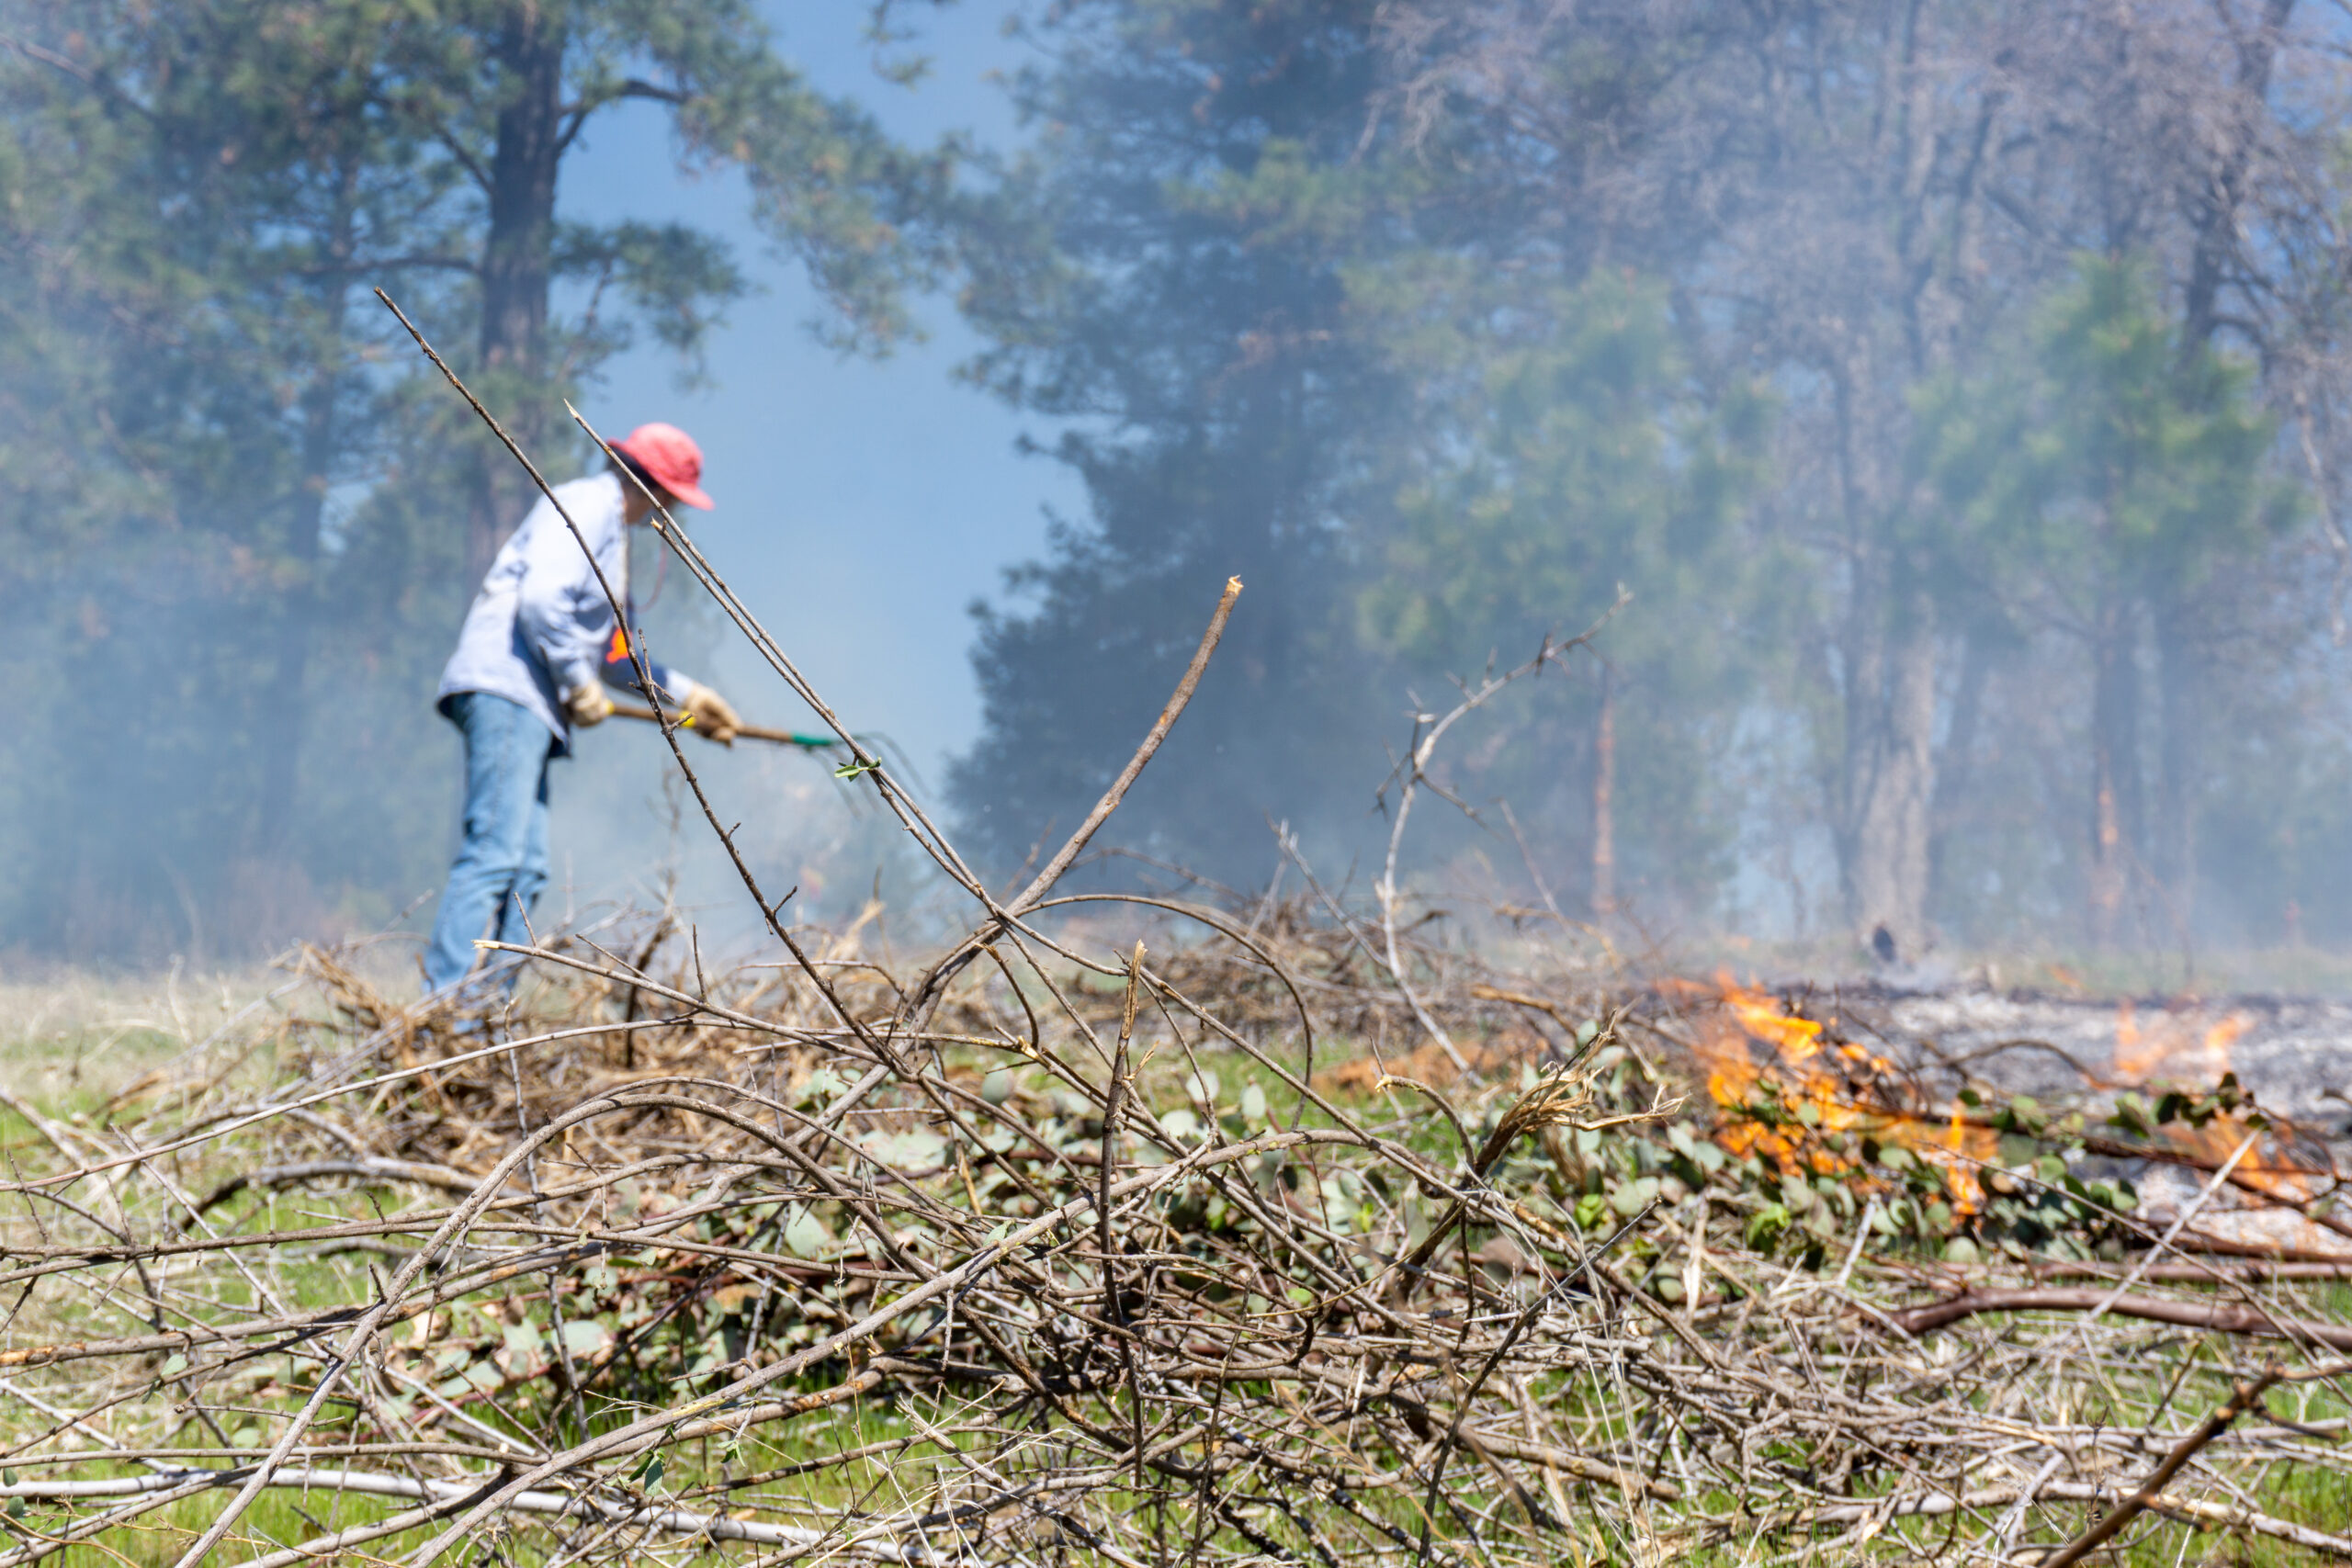 A person tending a prescribed burn in a clearing on a mountain ridge.